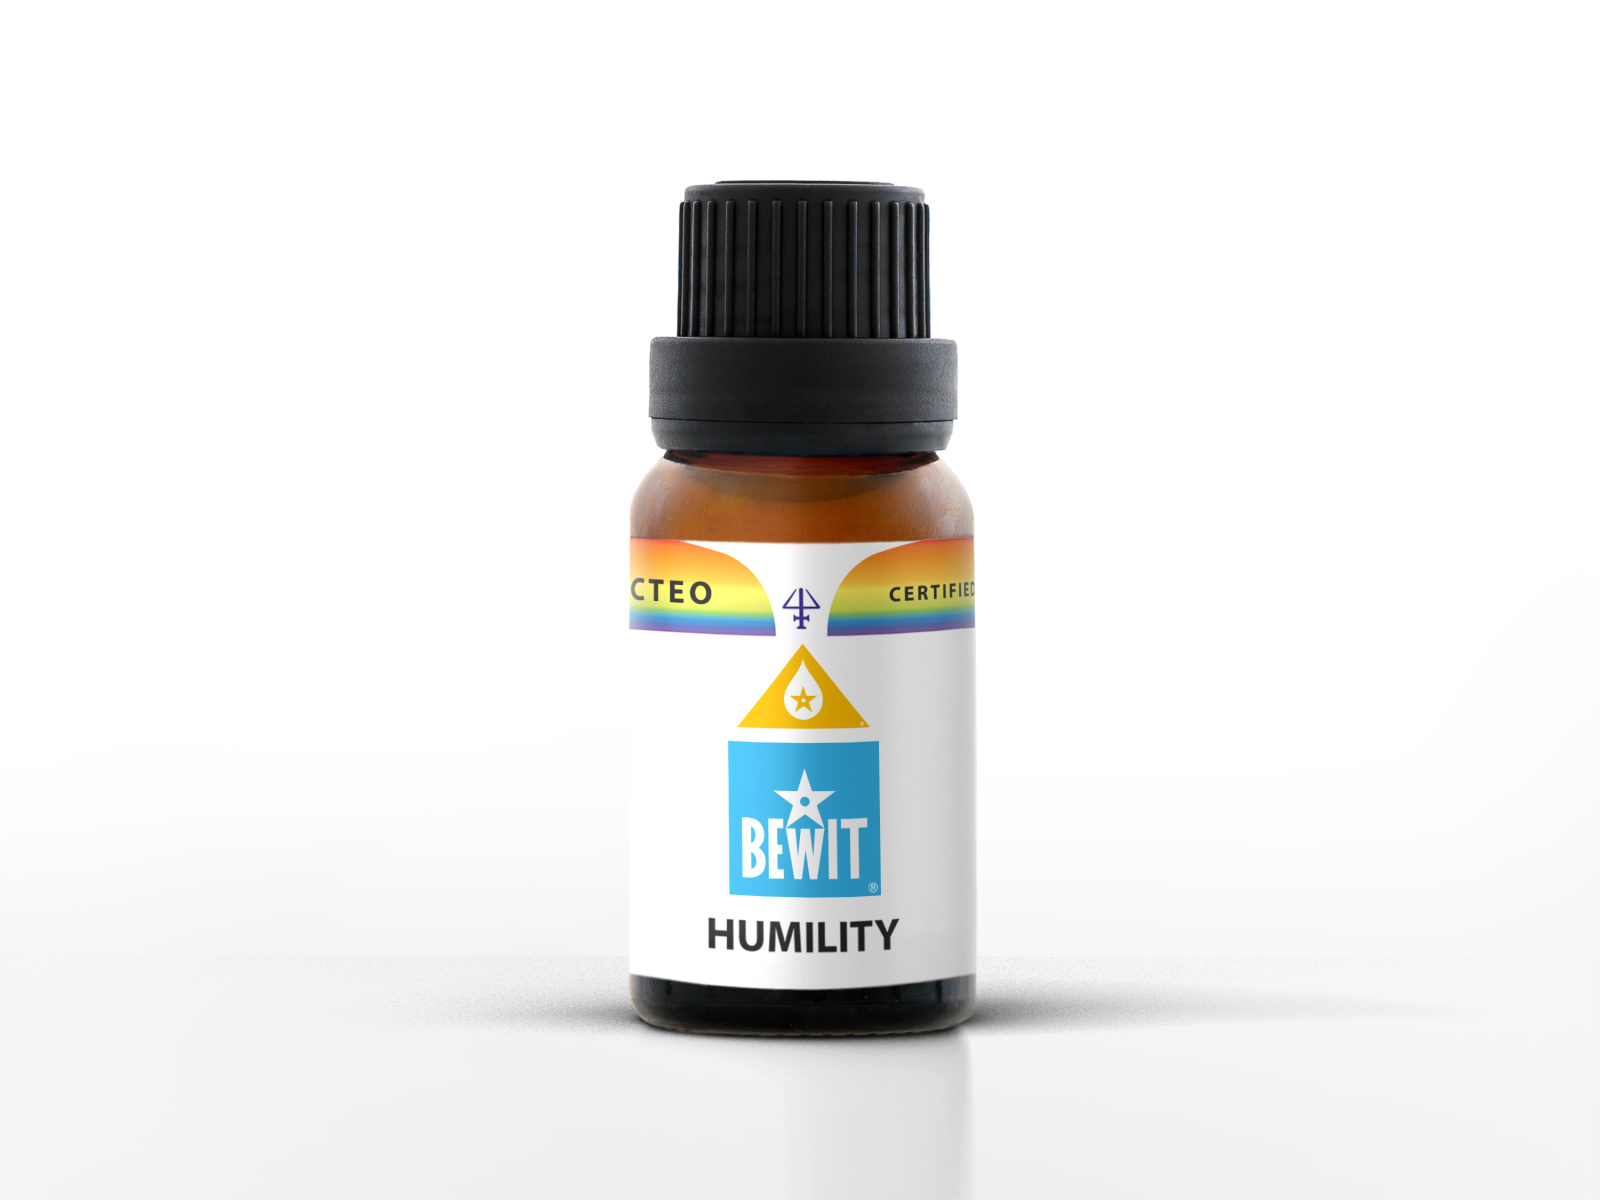 BEWIT HUMILITY - Blend of essential oils - 1